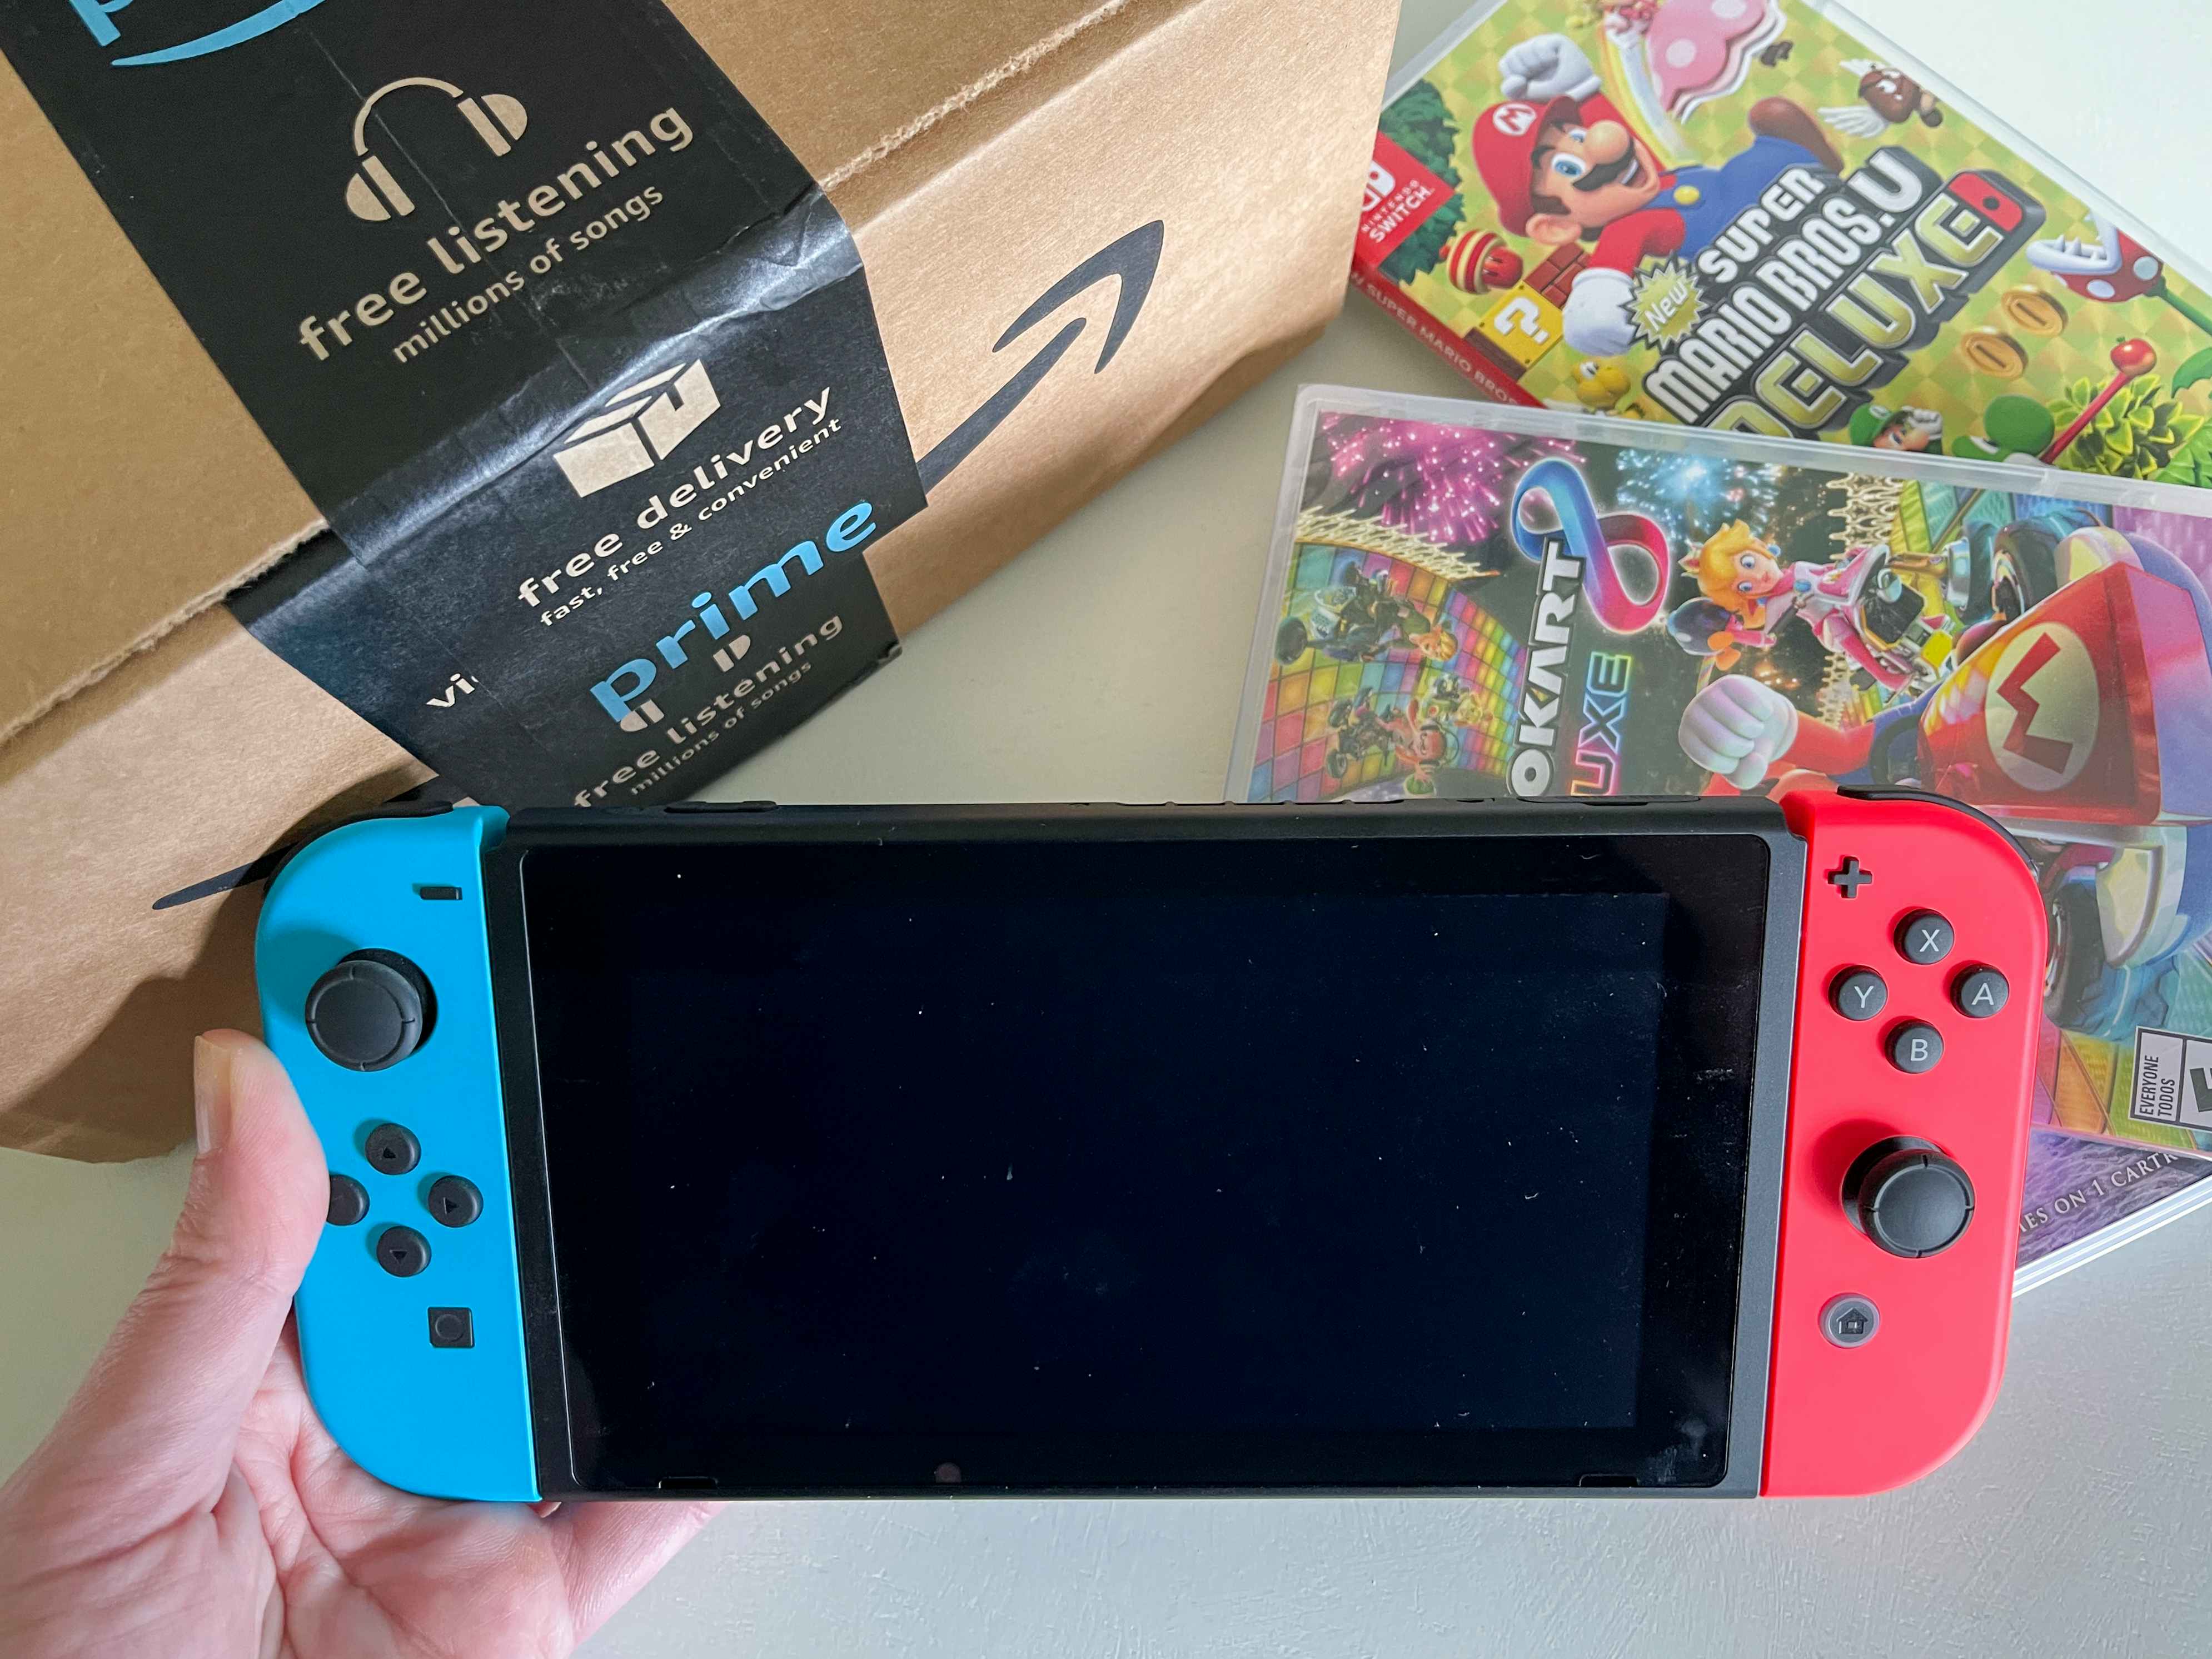 A person's hand holding a Nintendo Switch console next to an Amazon box and two Mario Switch games.